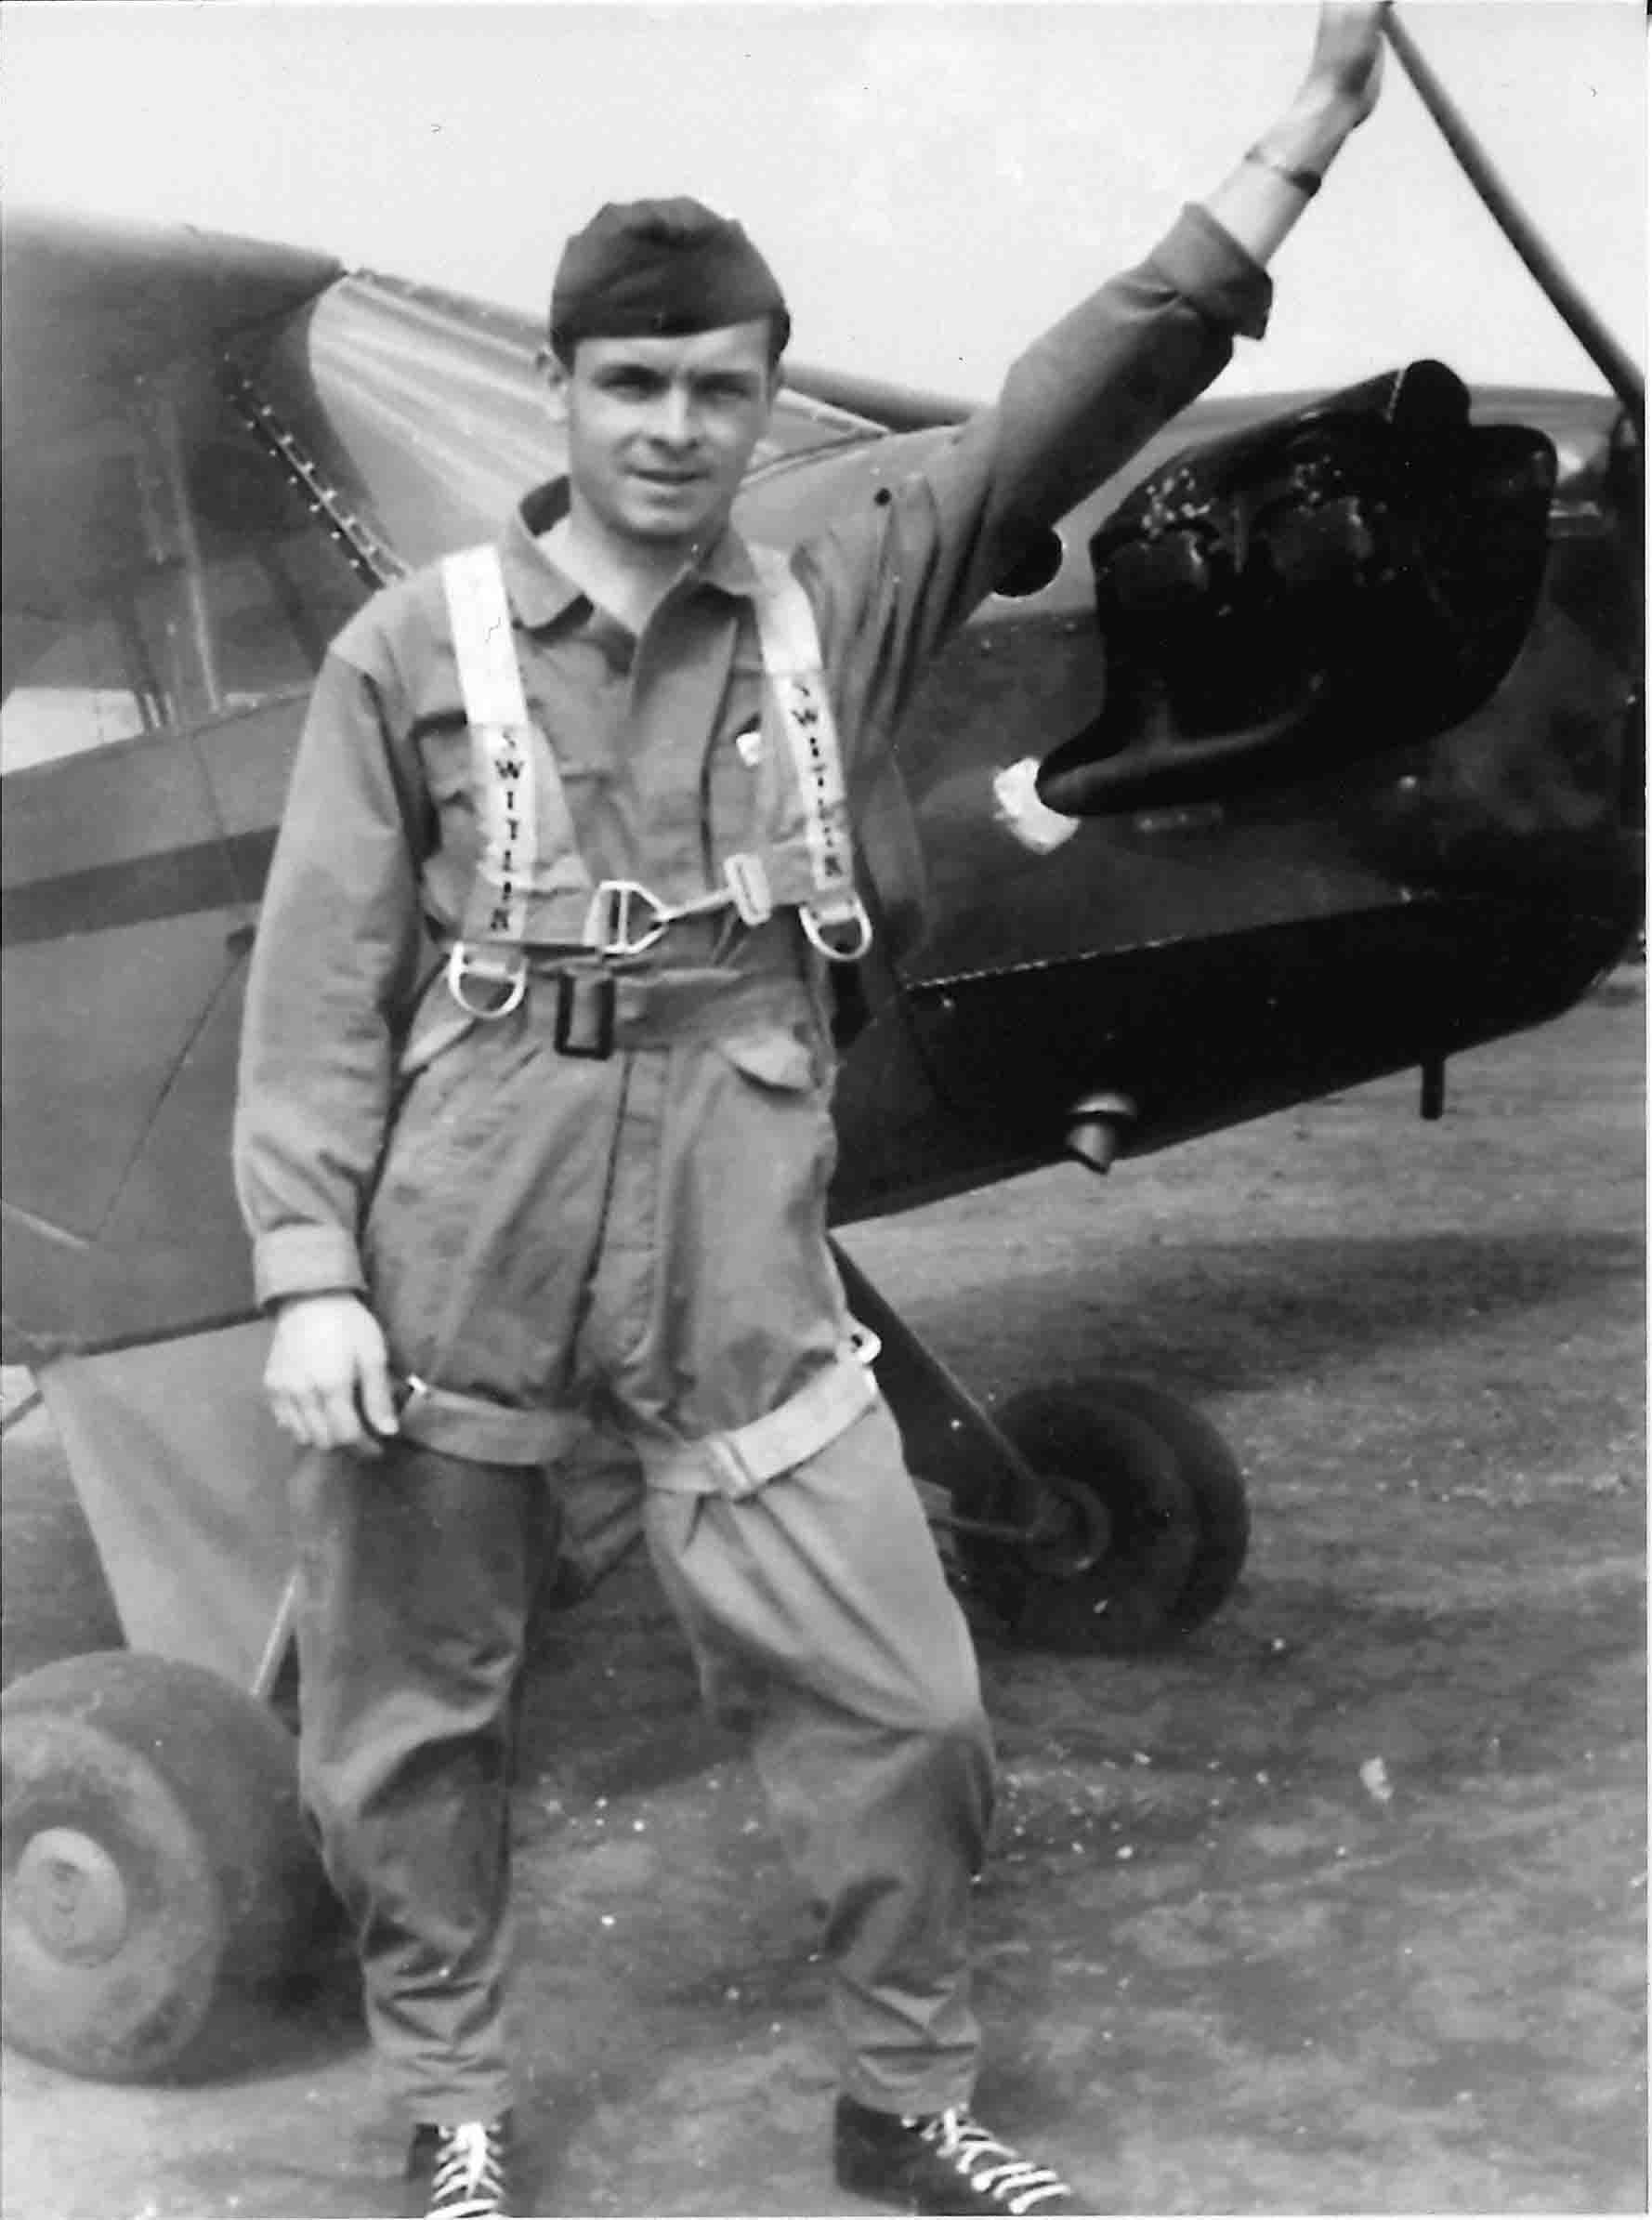 Bob McNichols standing next to a plane while wearing his US Army Air Corps uniform.